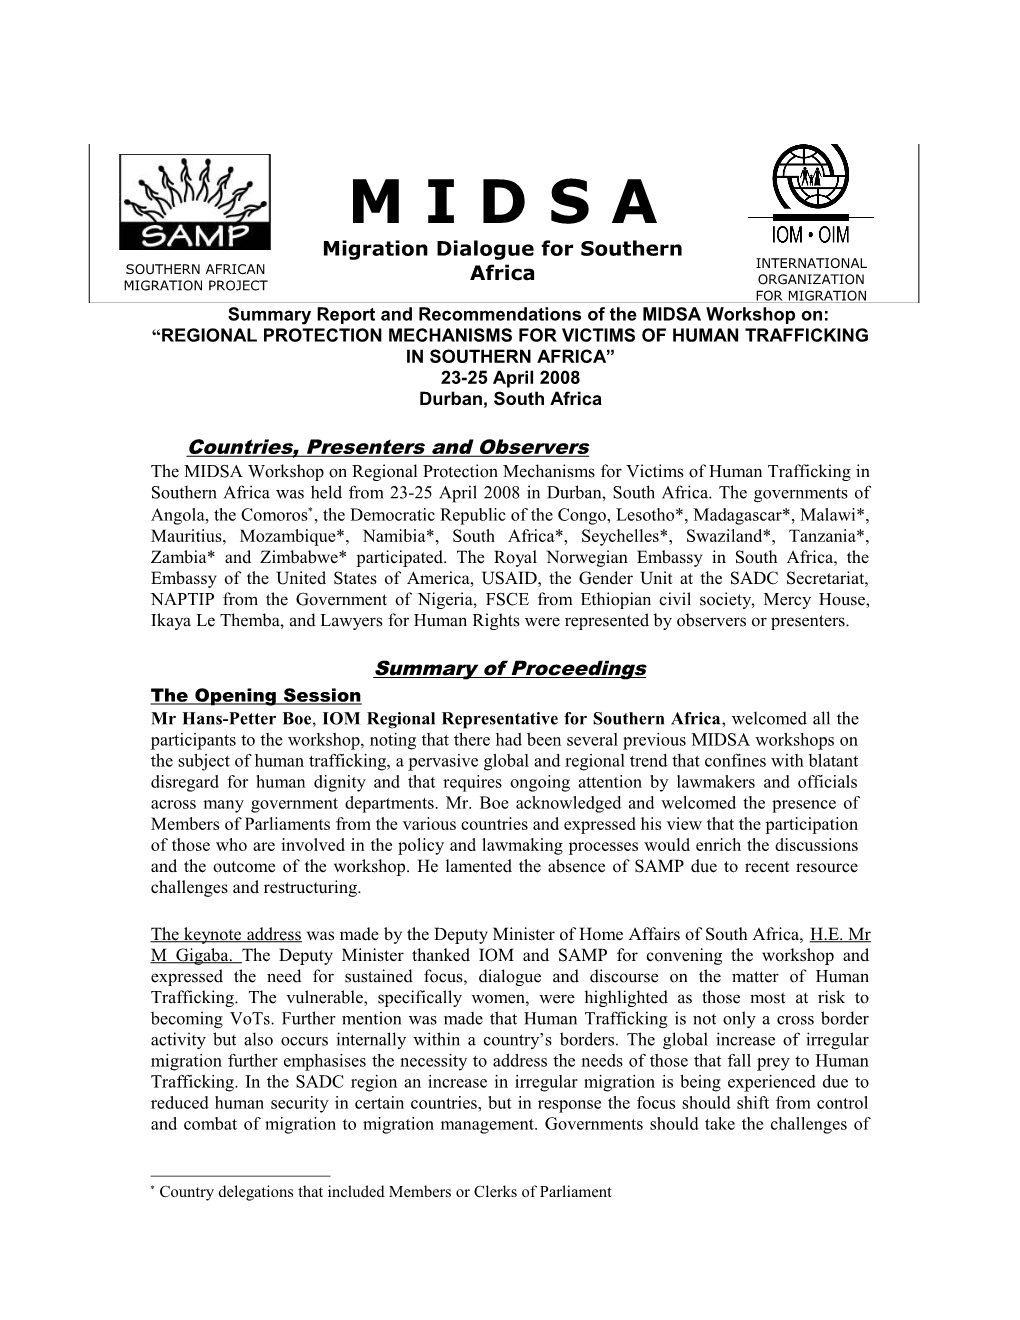 Summary Report and Recommendations of the MIDSA Workshop On